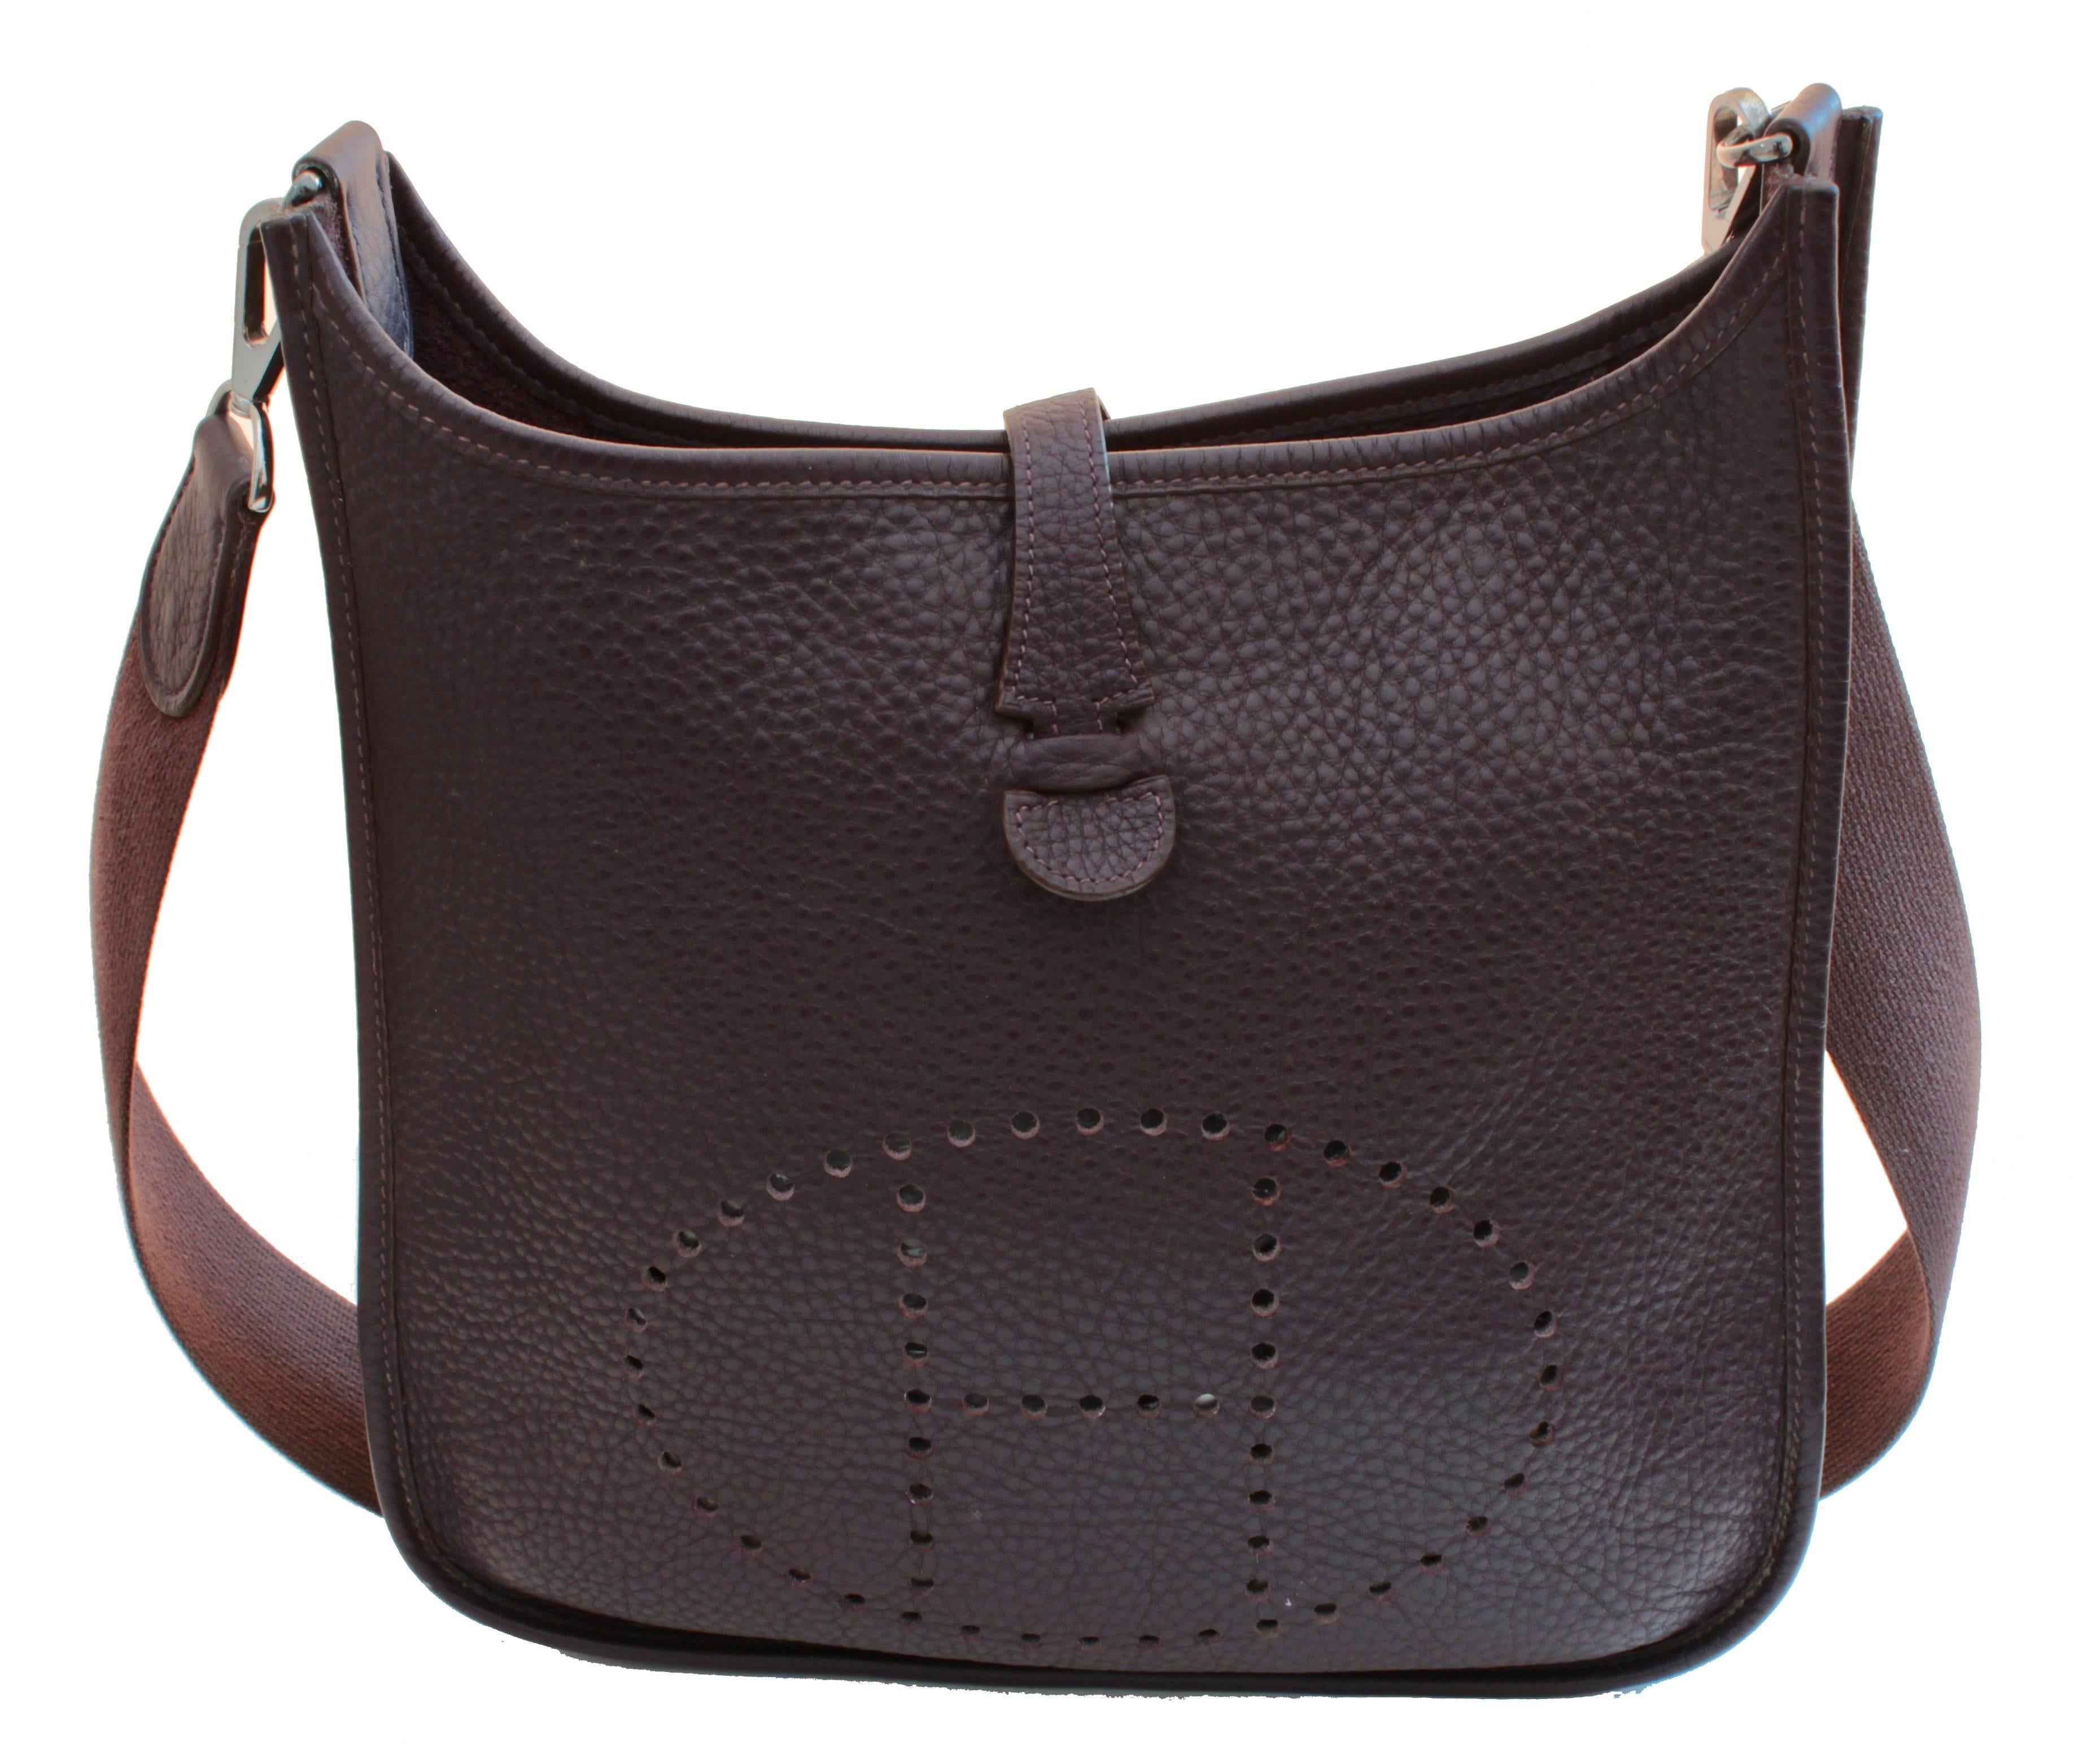 This incredible Evelyne I PM bag is made from their resilient Veau Taurillon Clemence leather in Raisin, which is a deep, almost eggplant colored shade.  The interior features one flat pocket and is unlined.  In excellent condition overall, we note